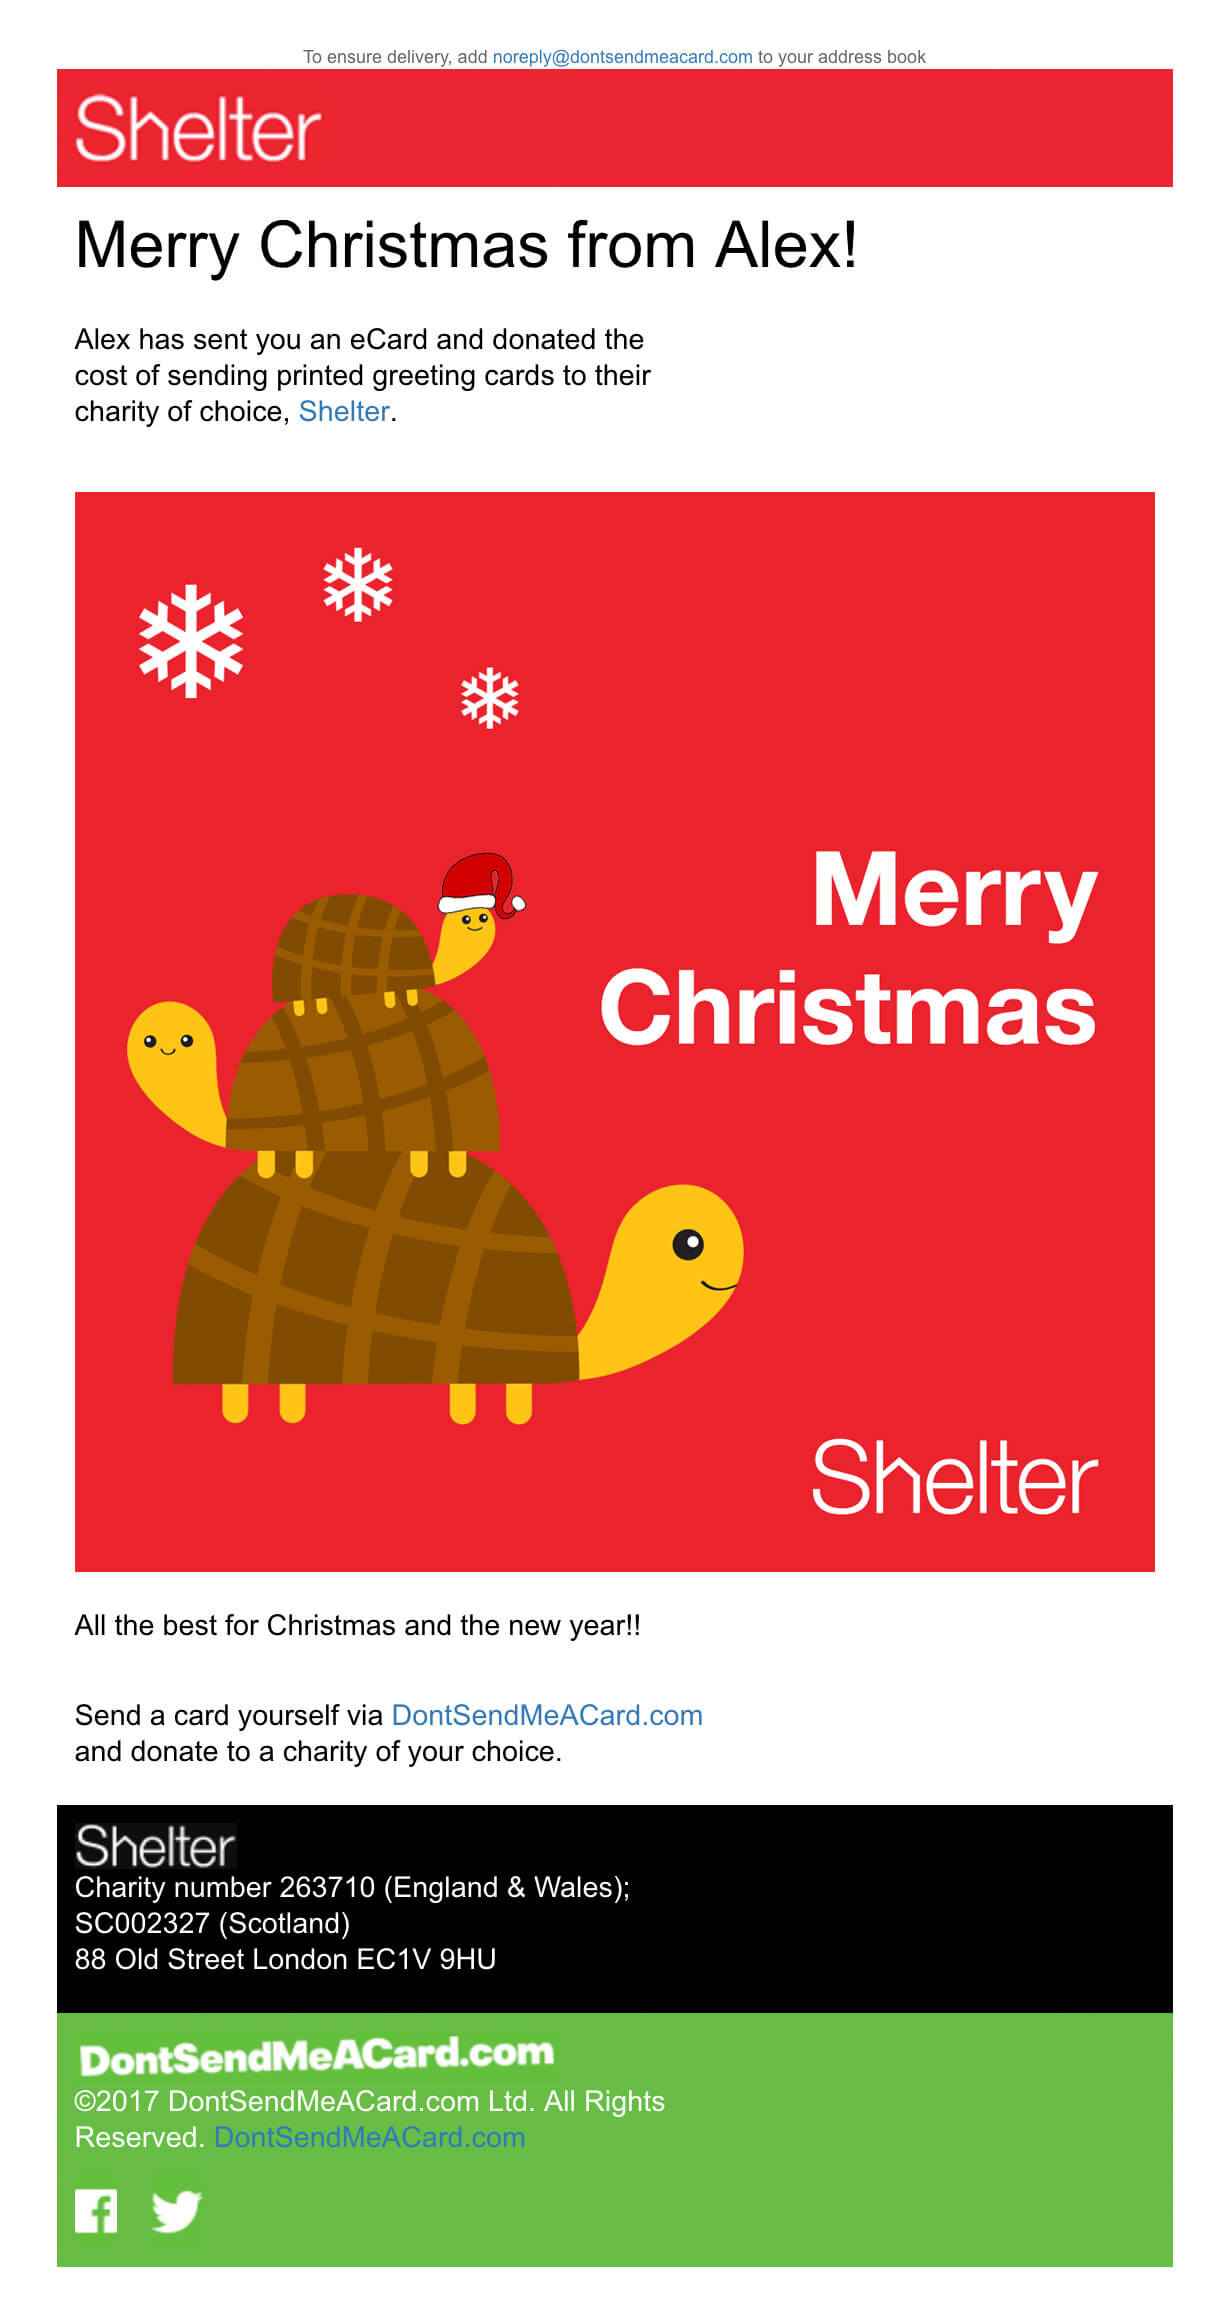 Shelter charity case study